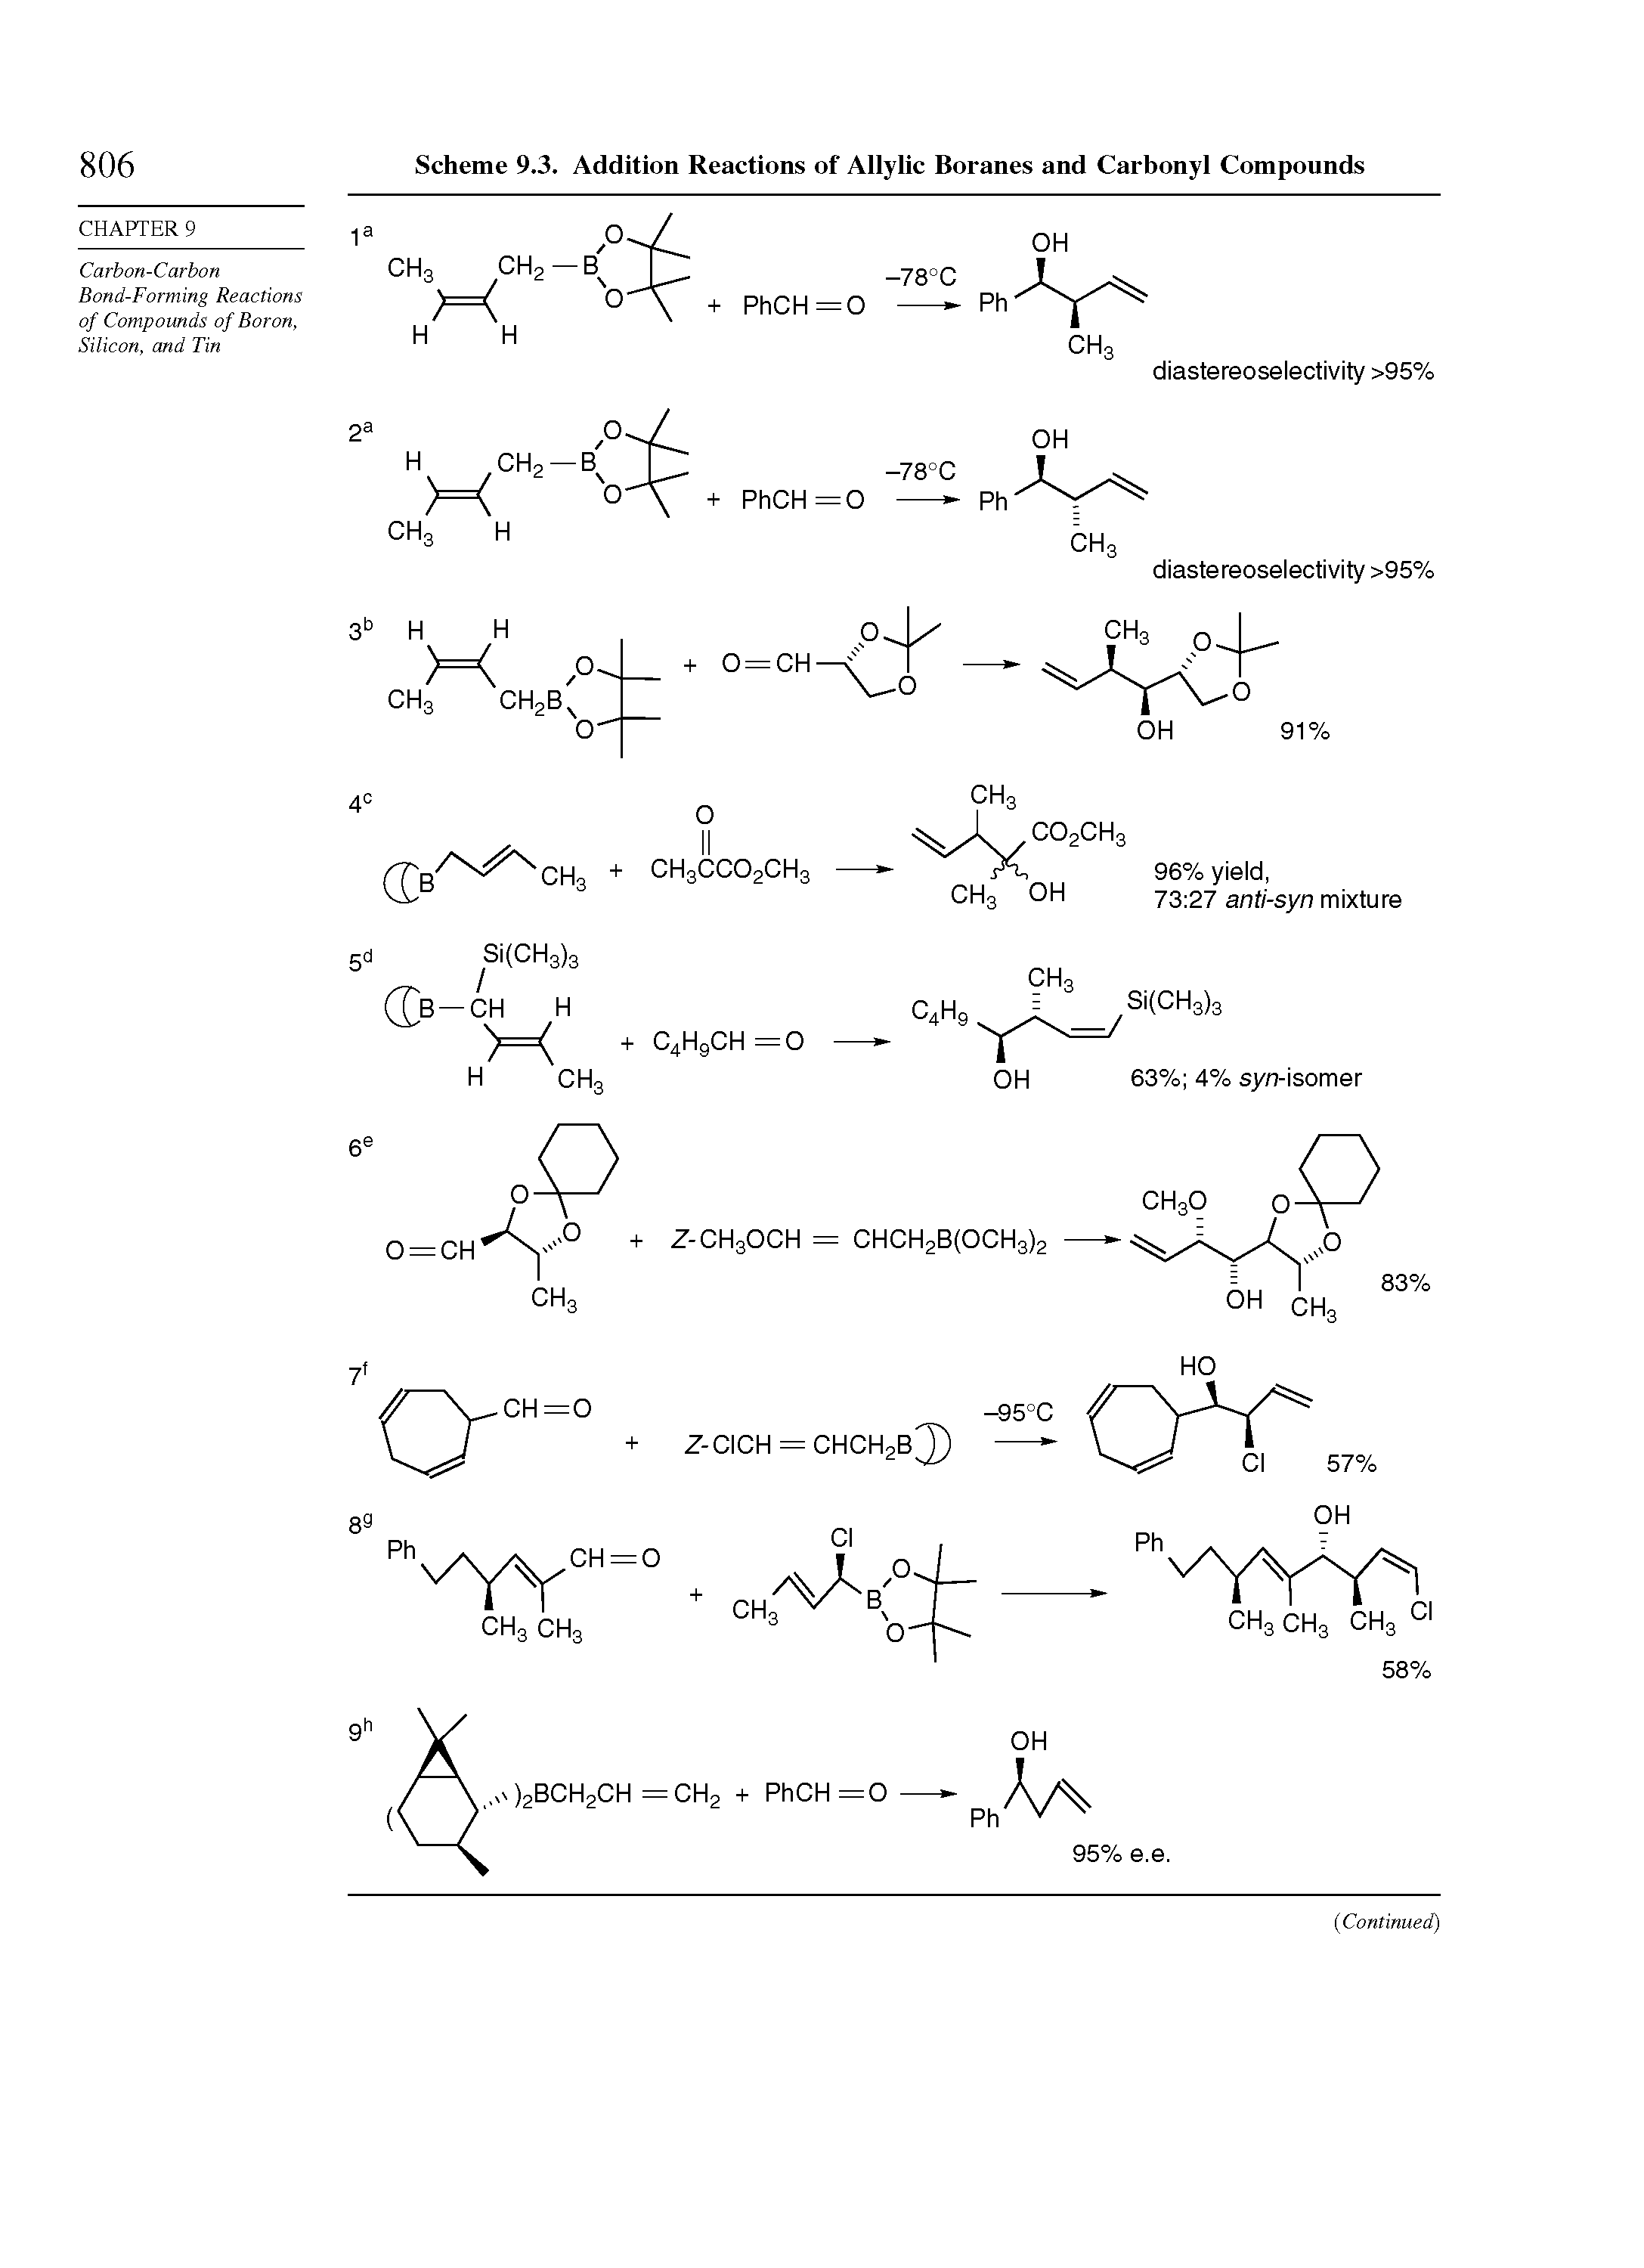 Scheme 9.3. Addition Reactions of Allylic Boranes and Carbonyl Compounds...